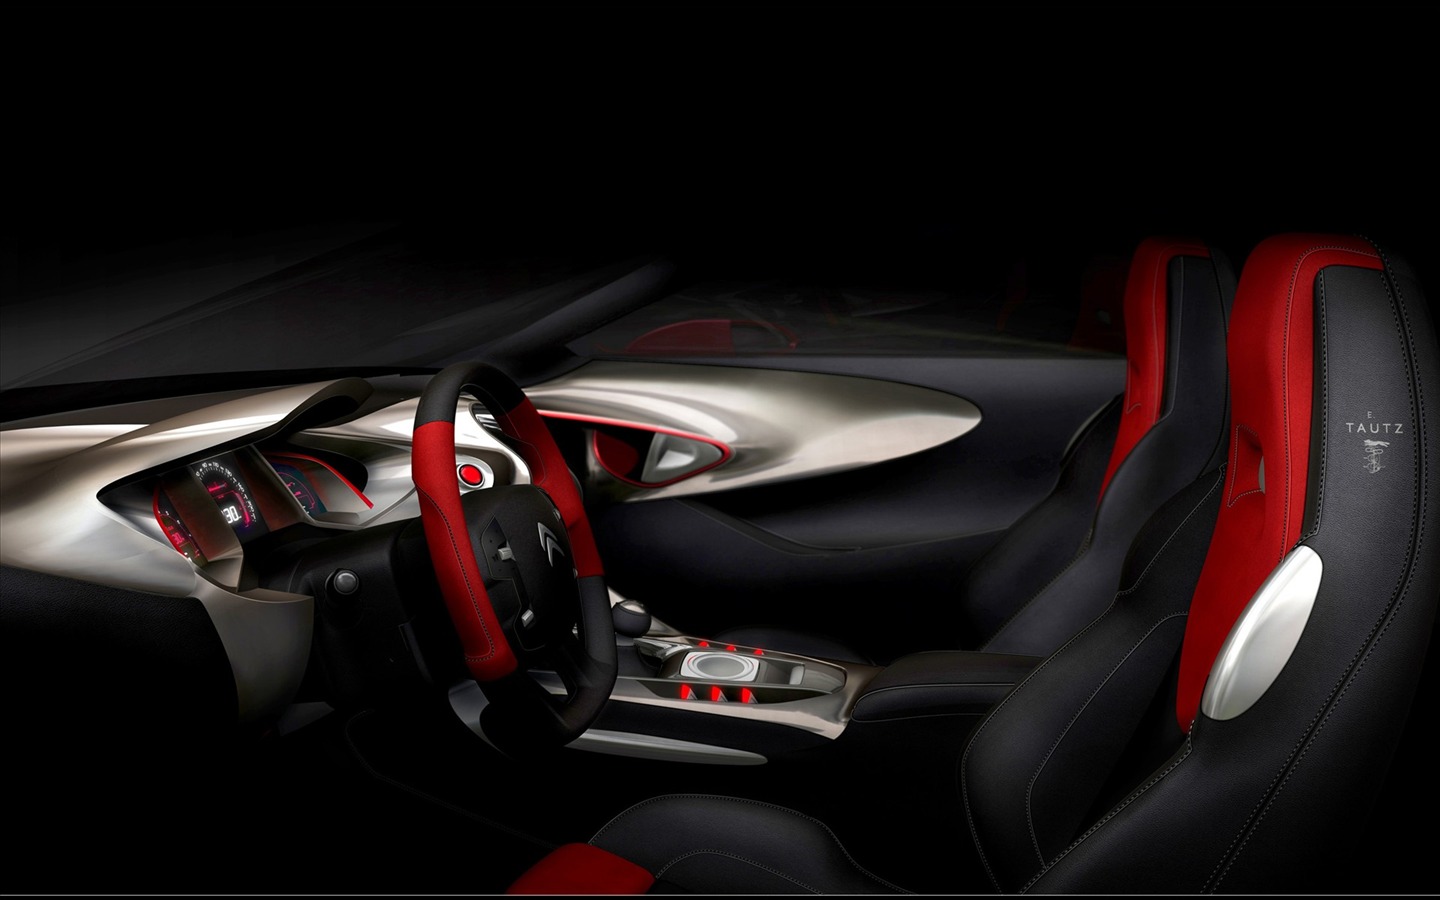 Special edition of concept cars wallpaper (5) #2 - 1440x900